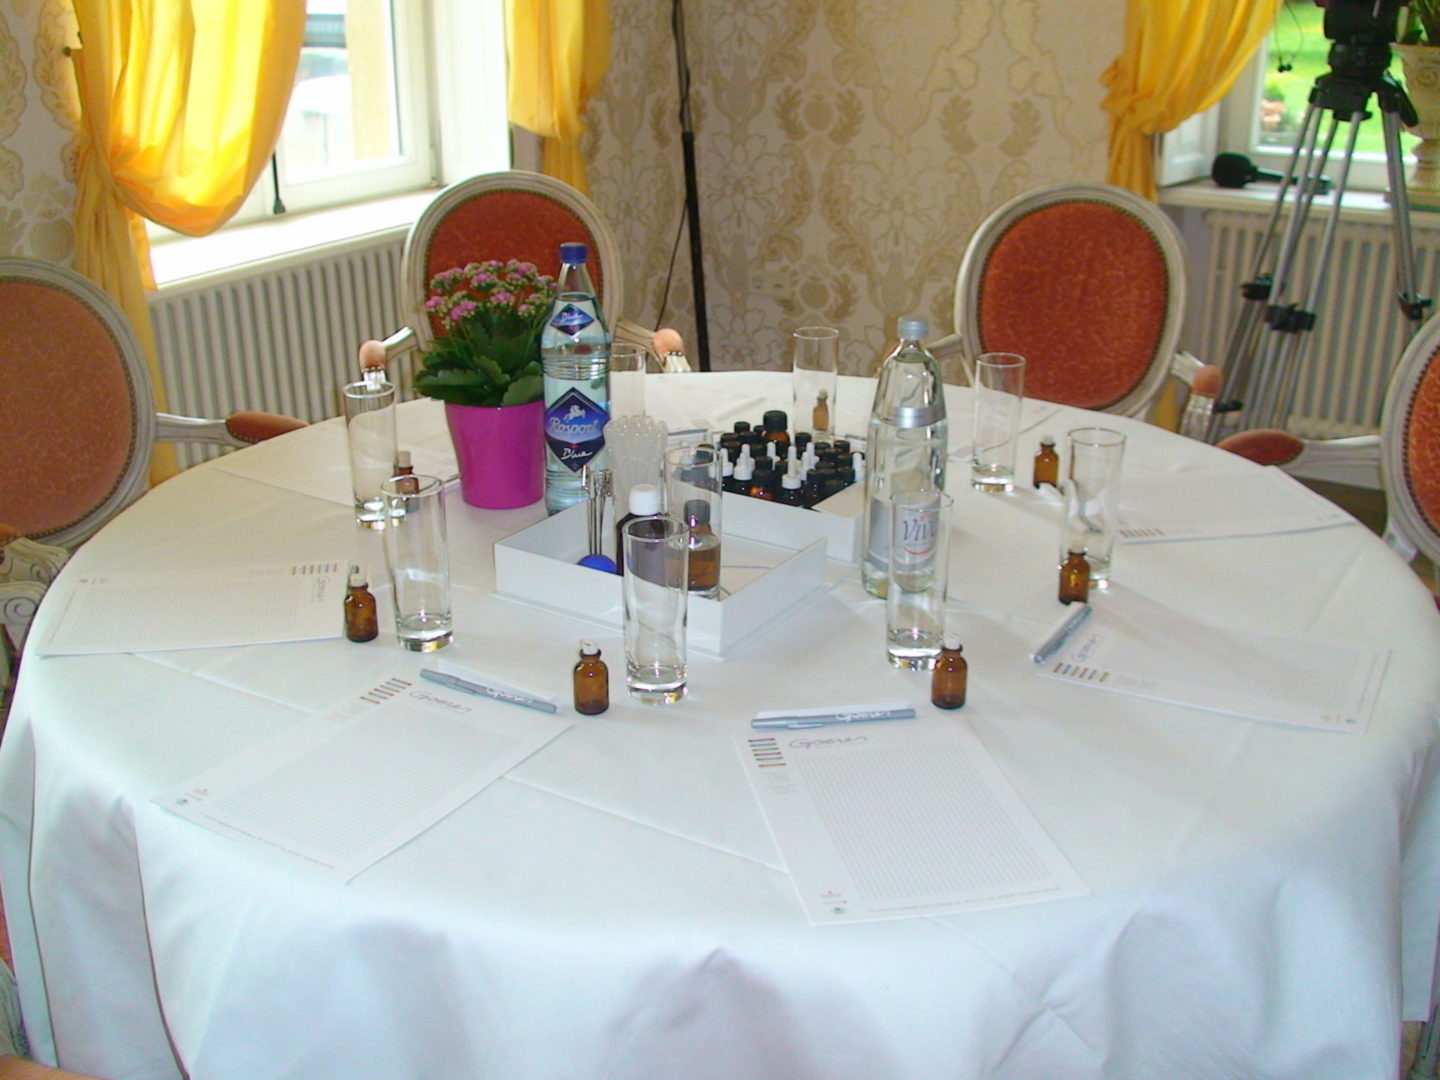 loyens-loeff-staff-day-2013-décoration-table-projet